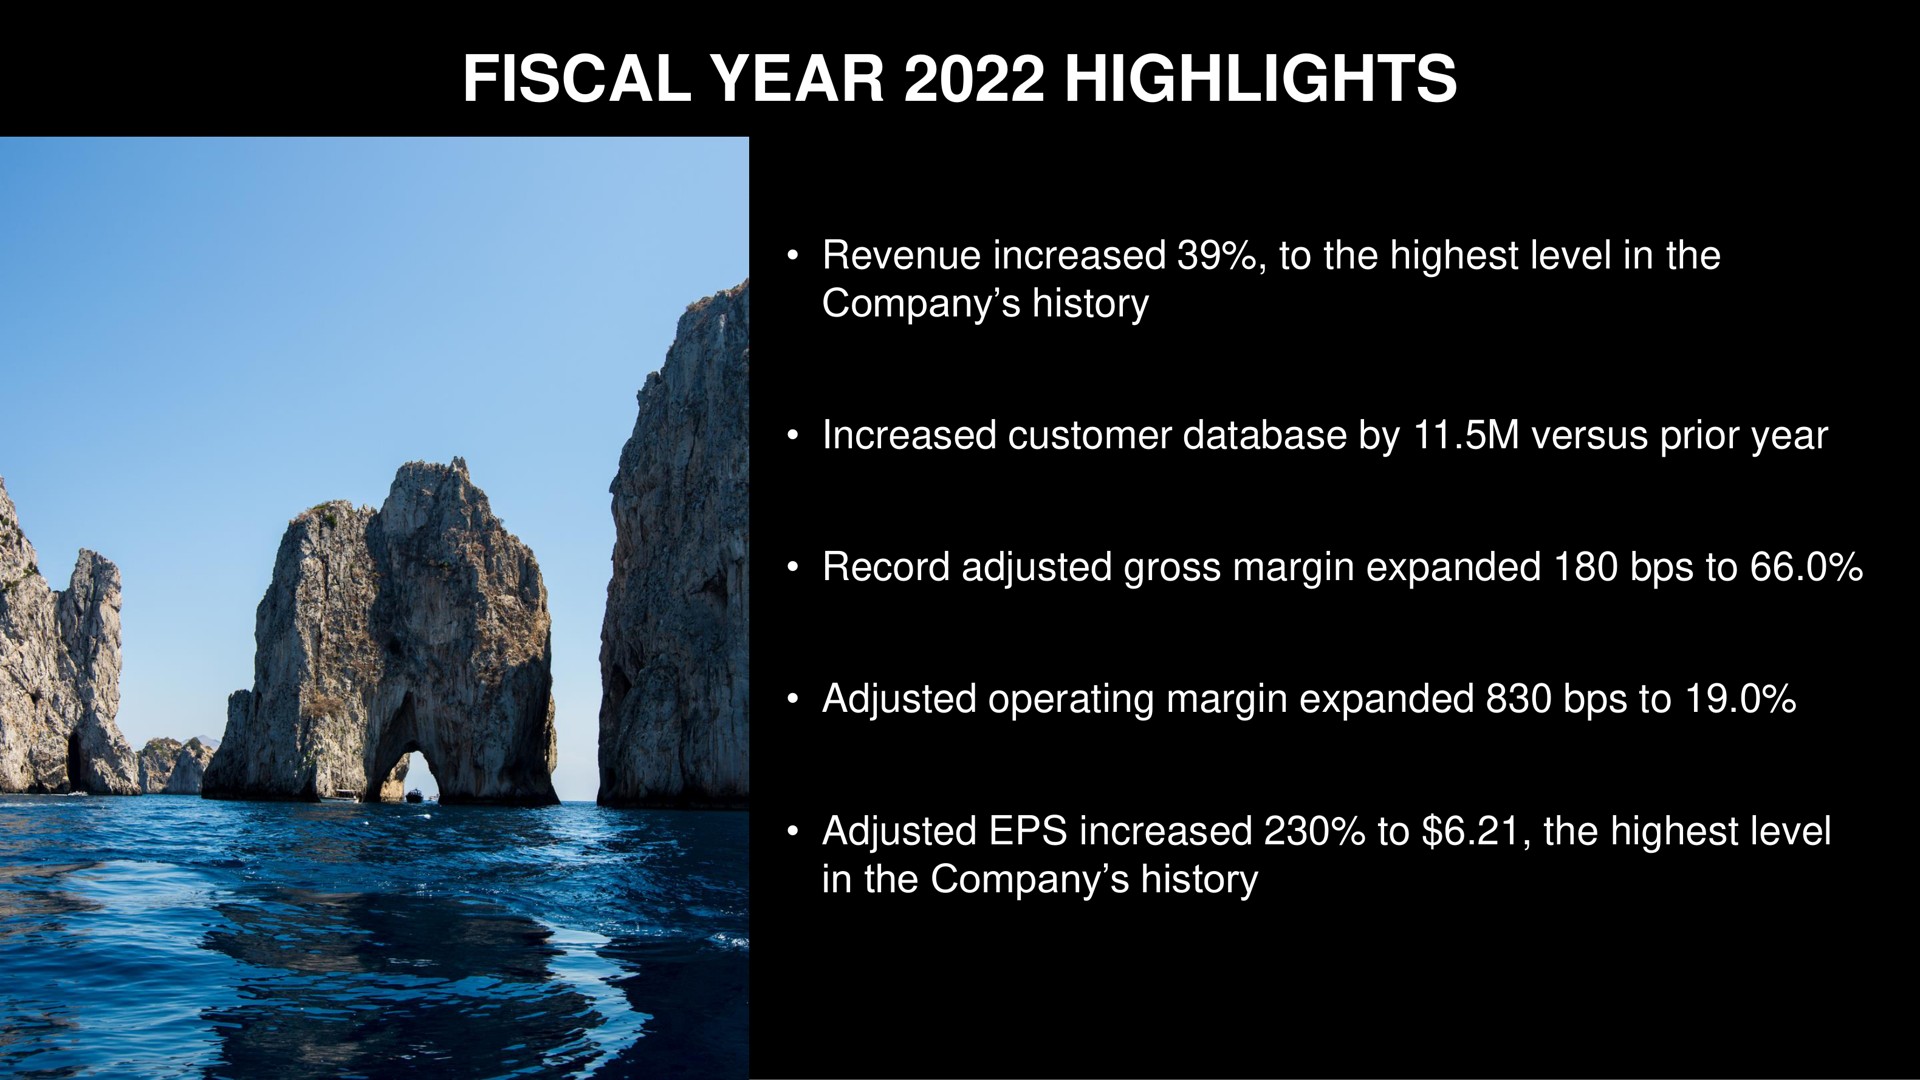 fiscal year highlights revenue increased to the highest level in the company history increased customer by versus prior year record adjusted gross margin expanded to adjusted operating margin expanded to adjusted increased to the highest level in the company history | Capri Holdings